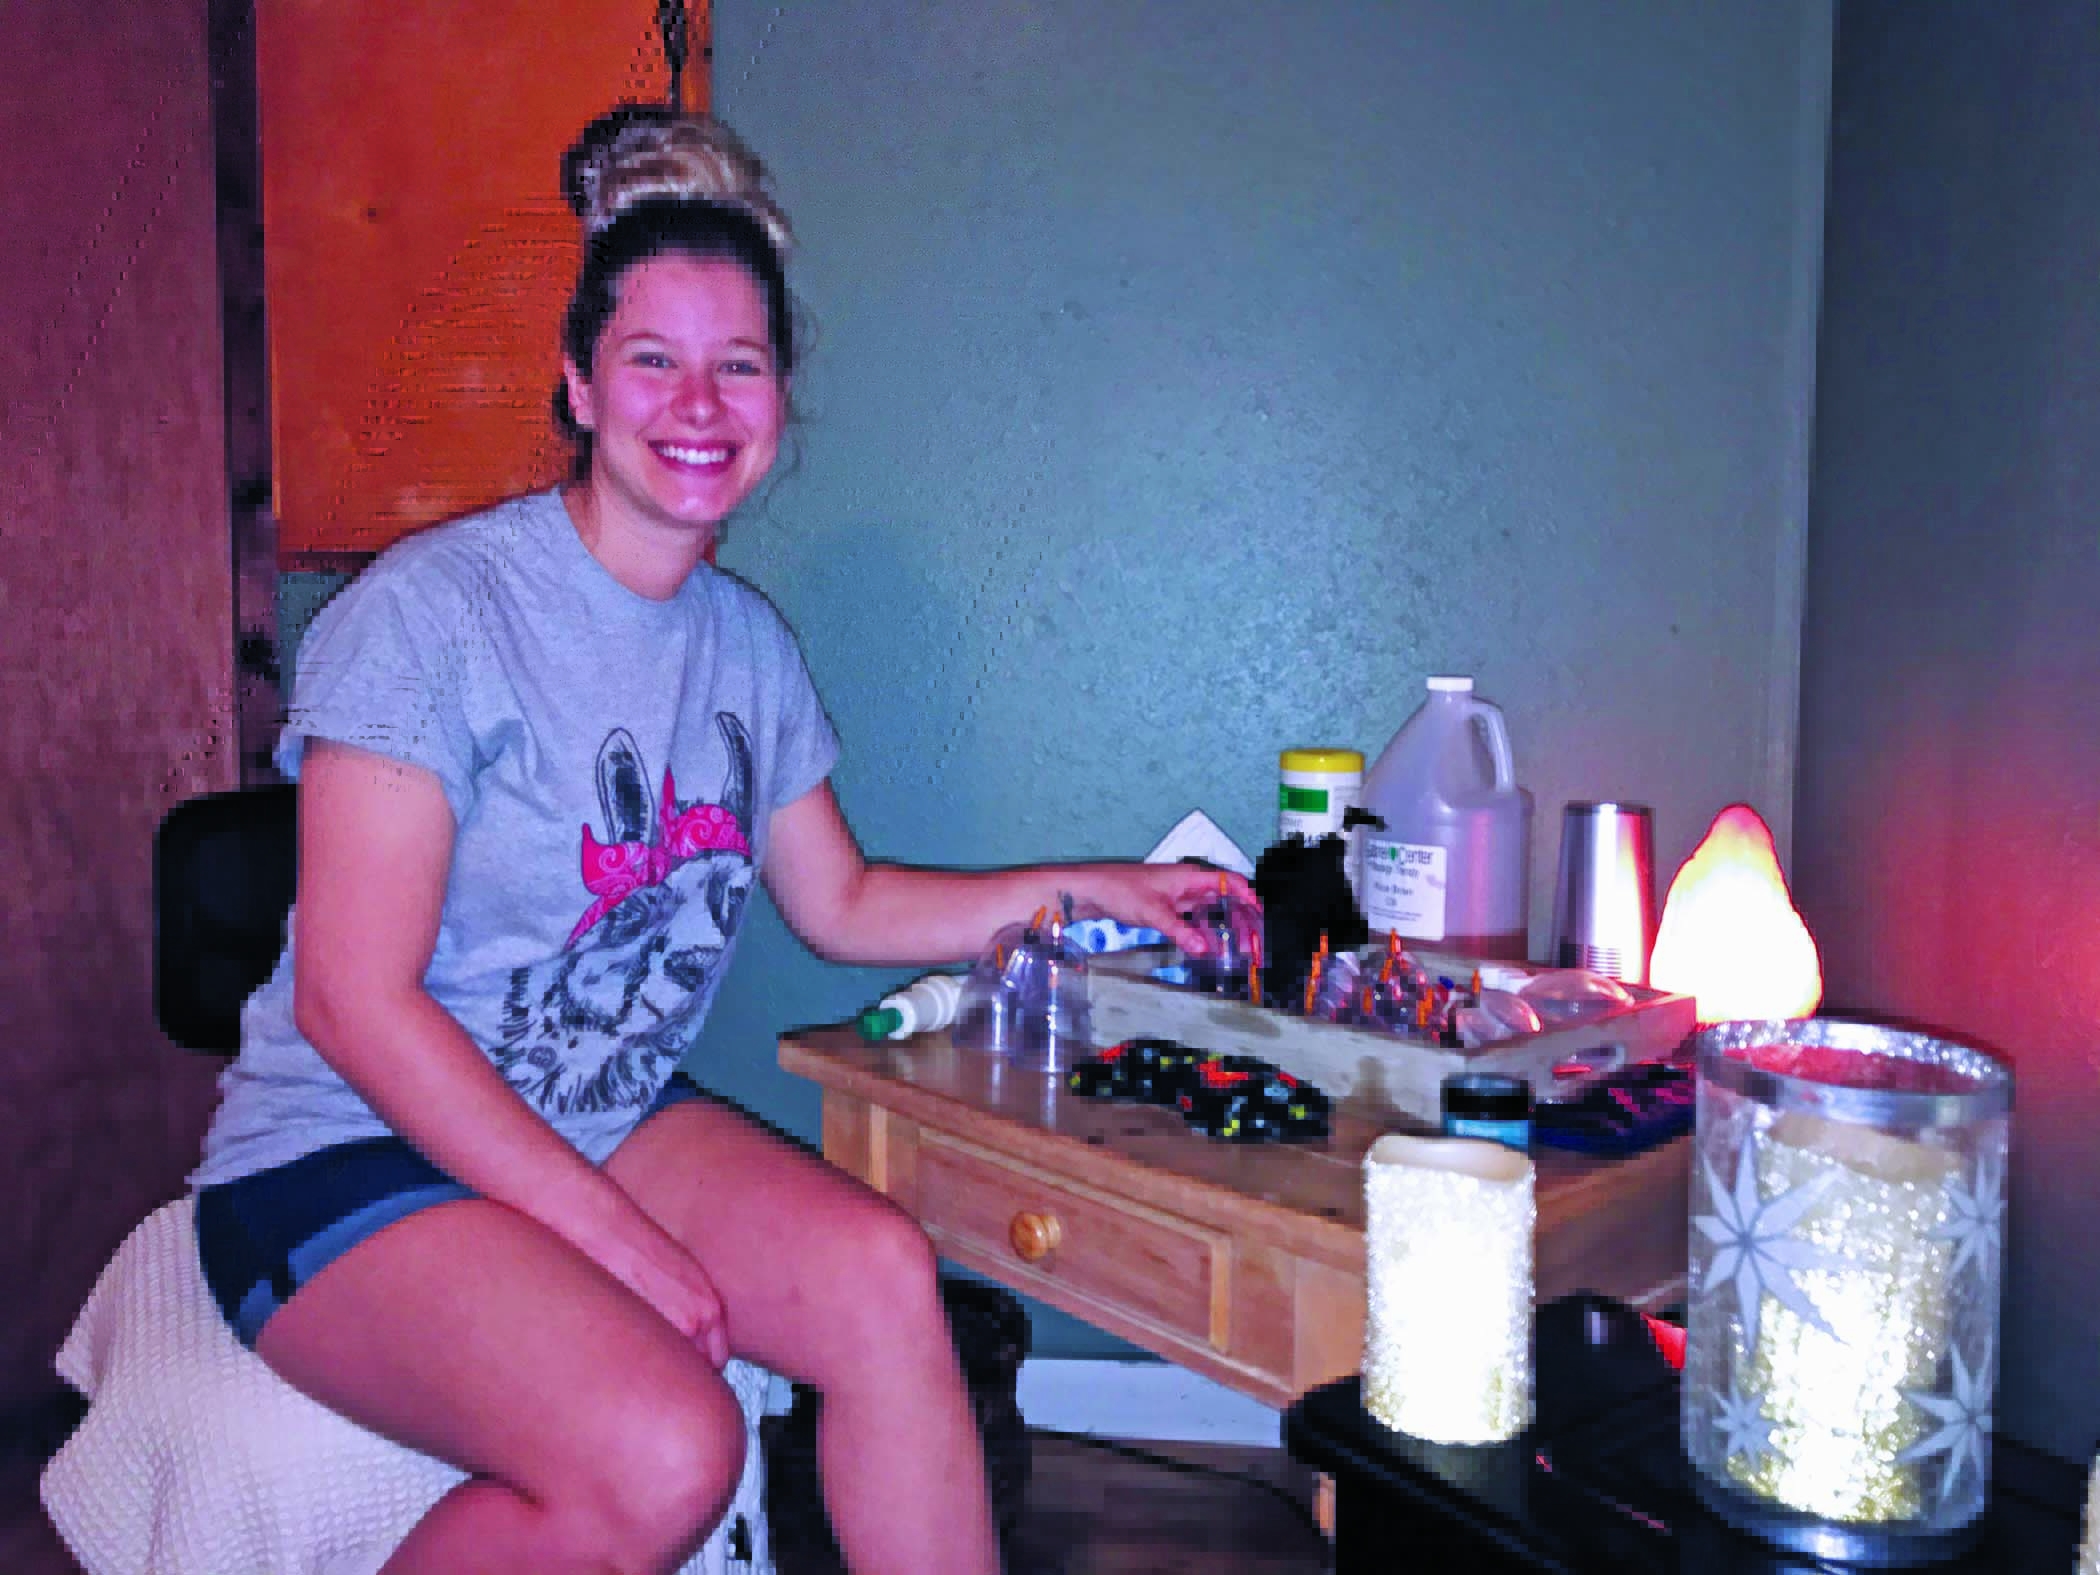 Jessie Bomar smiles as she prepares to give a client a massage at her business, Ohana. Bomar offers injury recovery and relaxation massages in her studio. She has been open since 2018 but has recently captured the most business she has had to date. (MNJ photo/Cory Spiers)